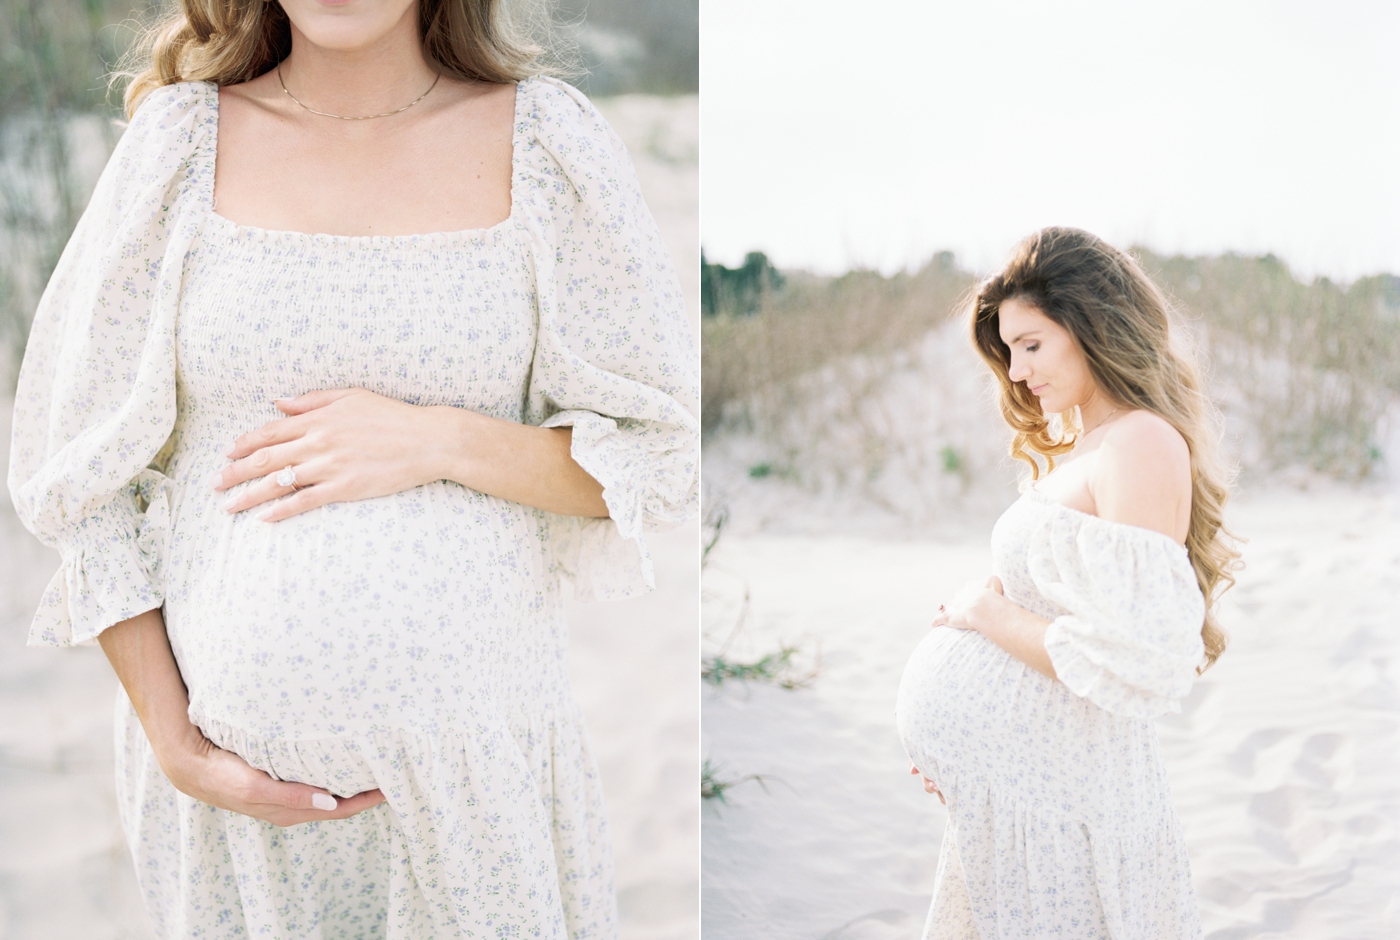 New mother in floral print dress on the beach | Photo by Caitlyn Motycka Photography.